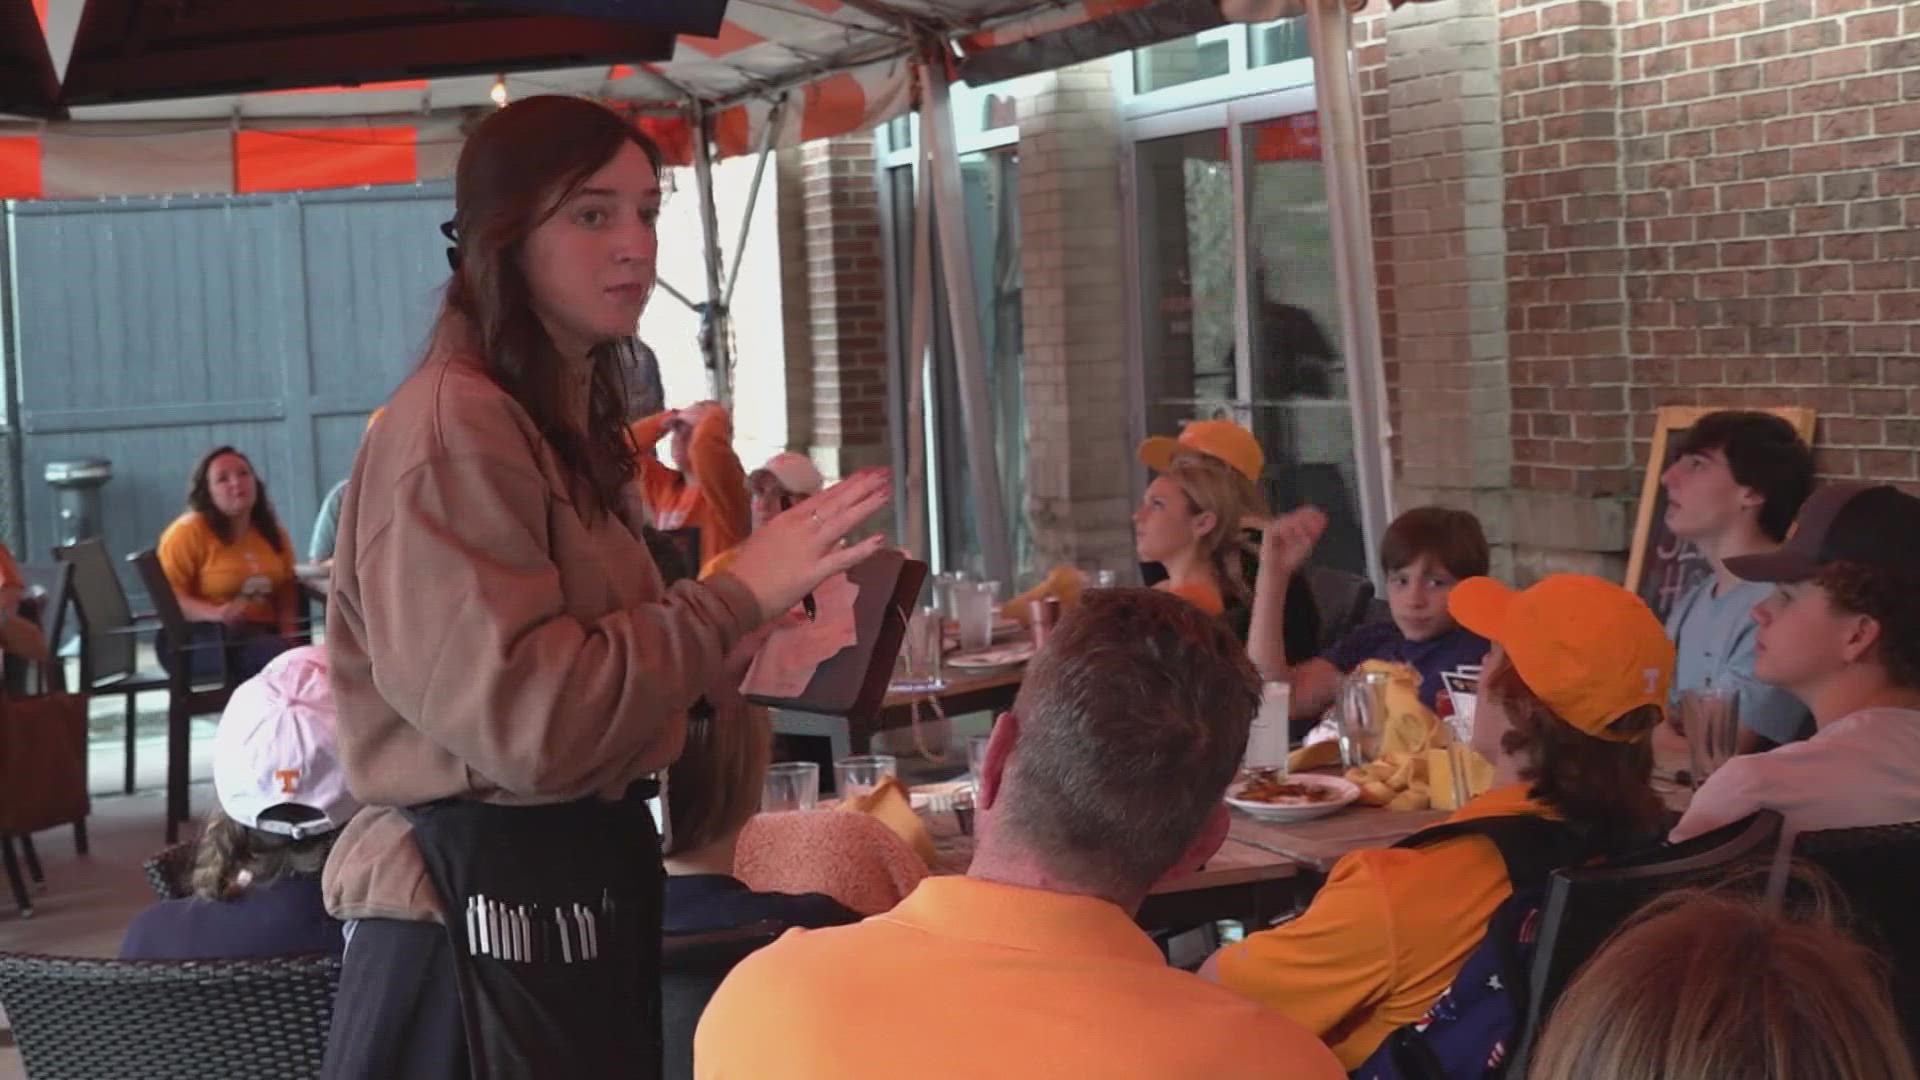 10News Reporter Chrissa Loukas spent the day at a local business where fans have been watching the game.